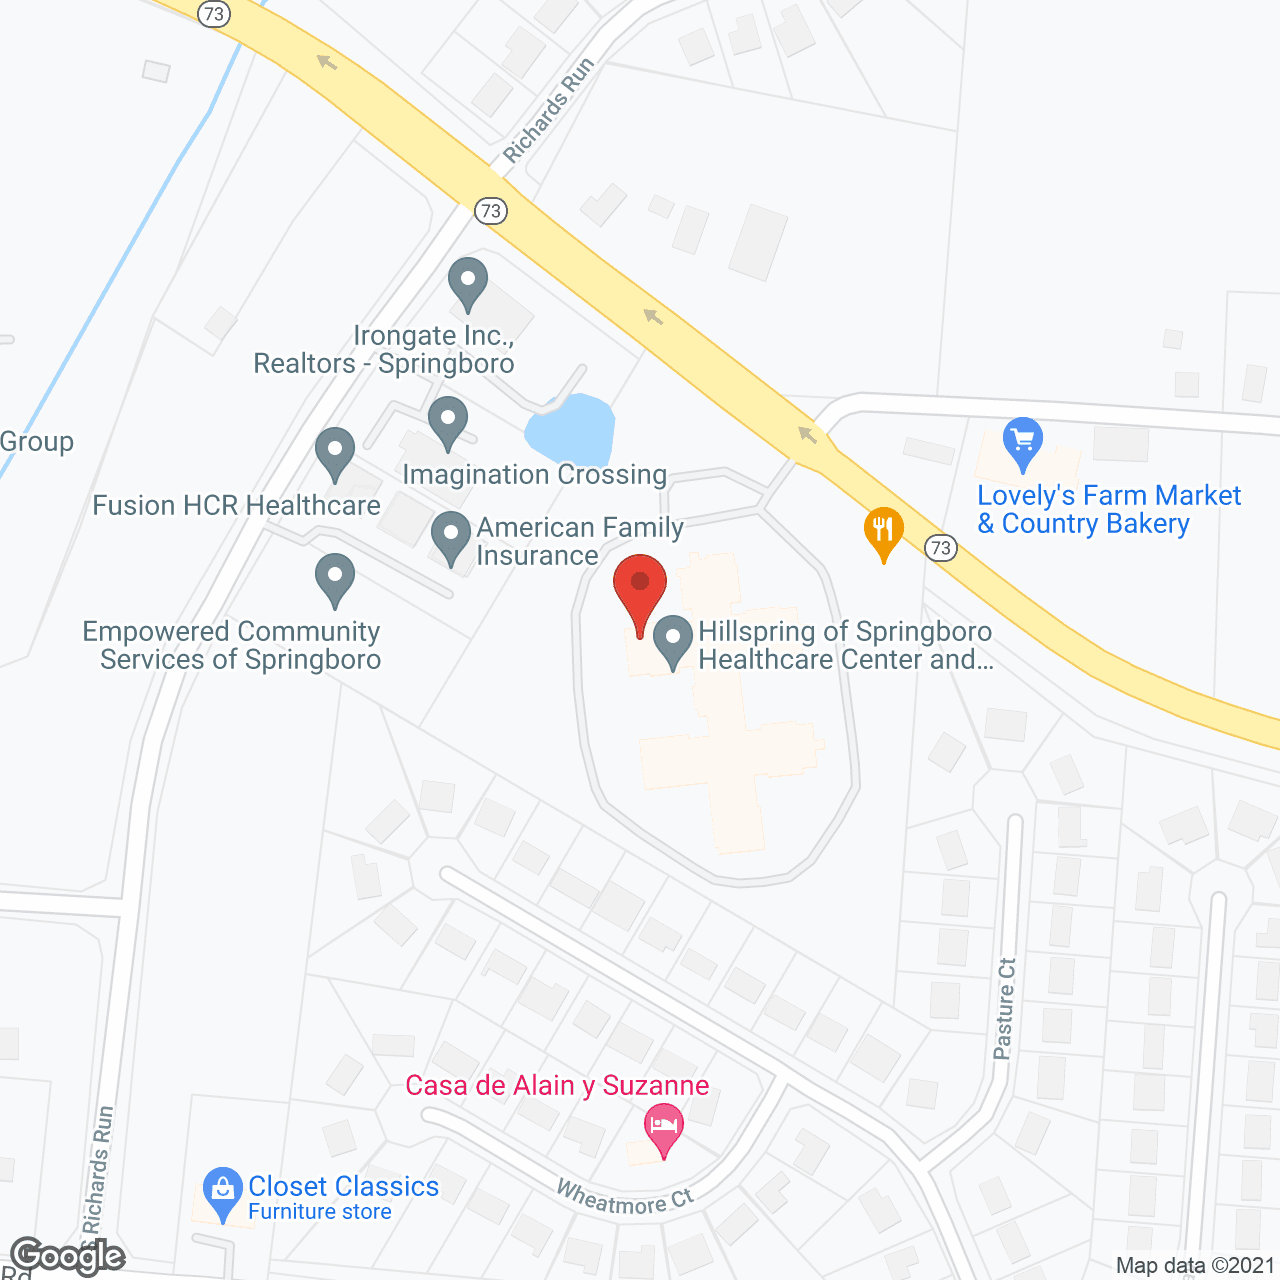 Hillspring Transitional Care Center in google map